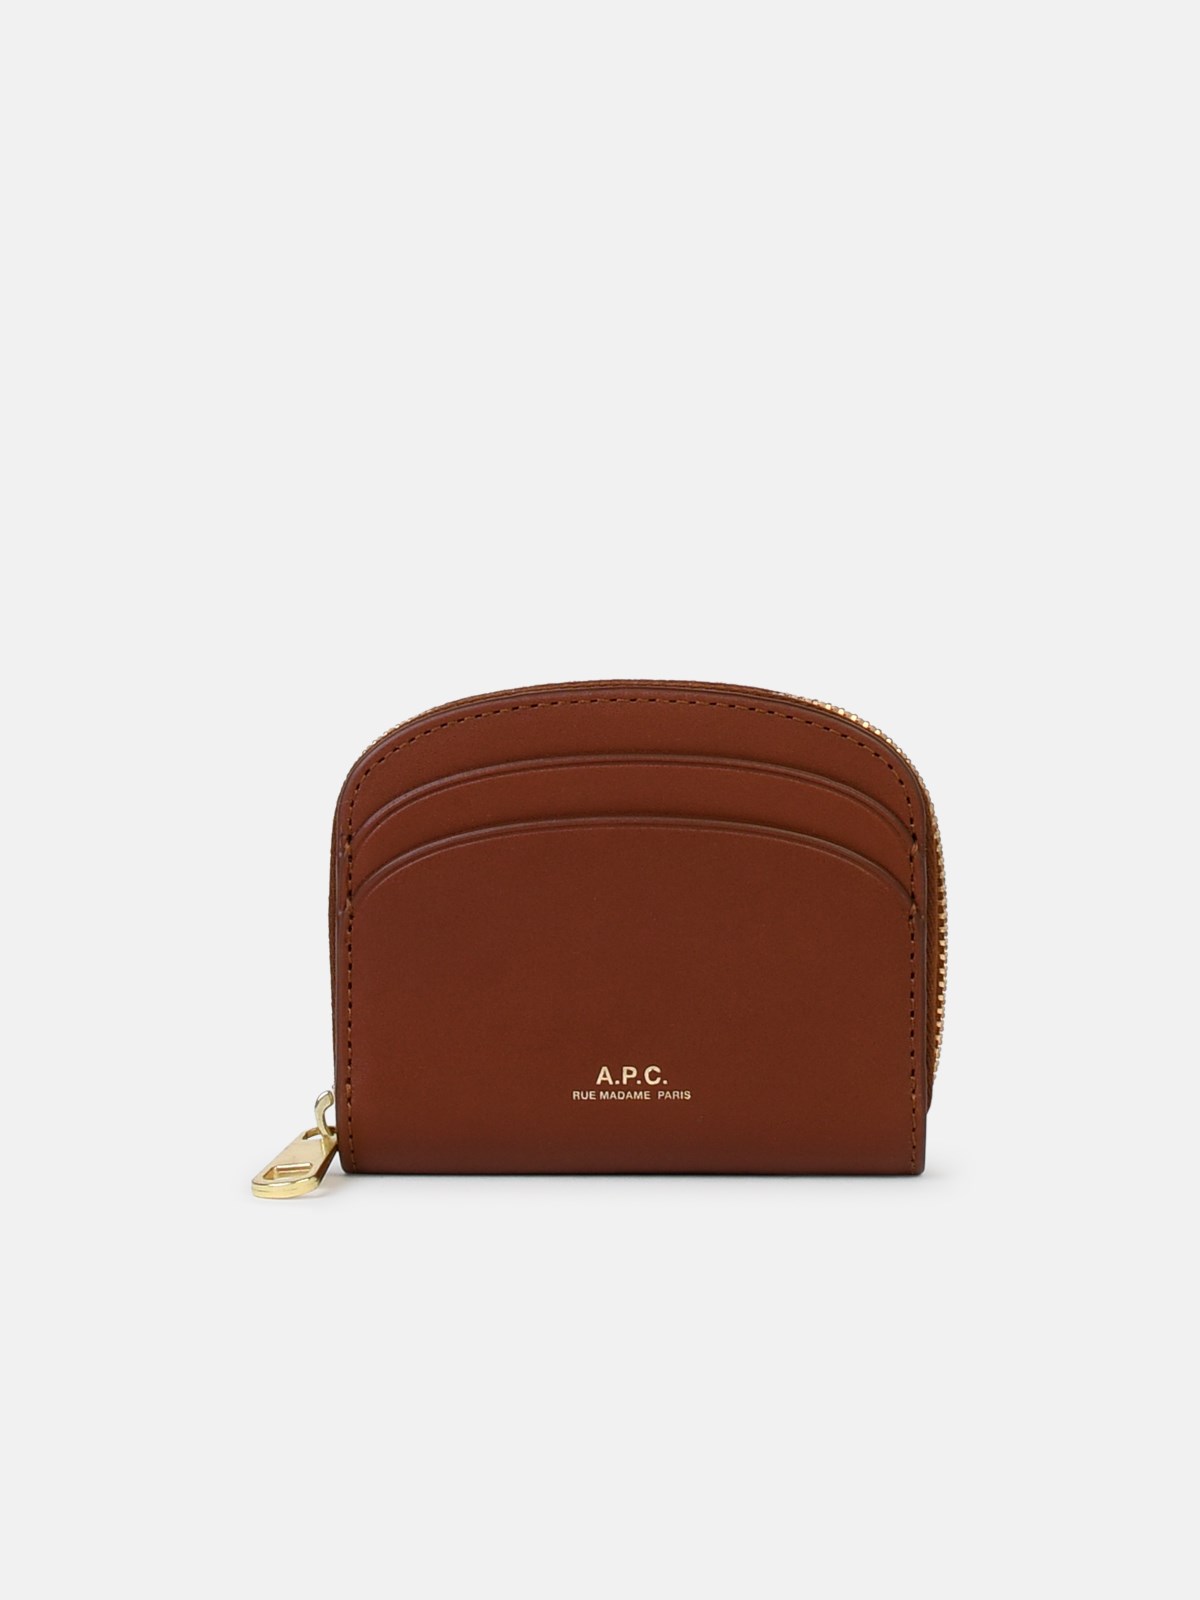 Apc Small 'demi Lune' Brown Leather Wallet